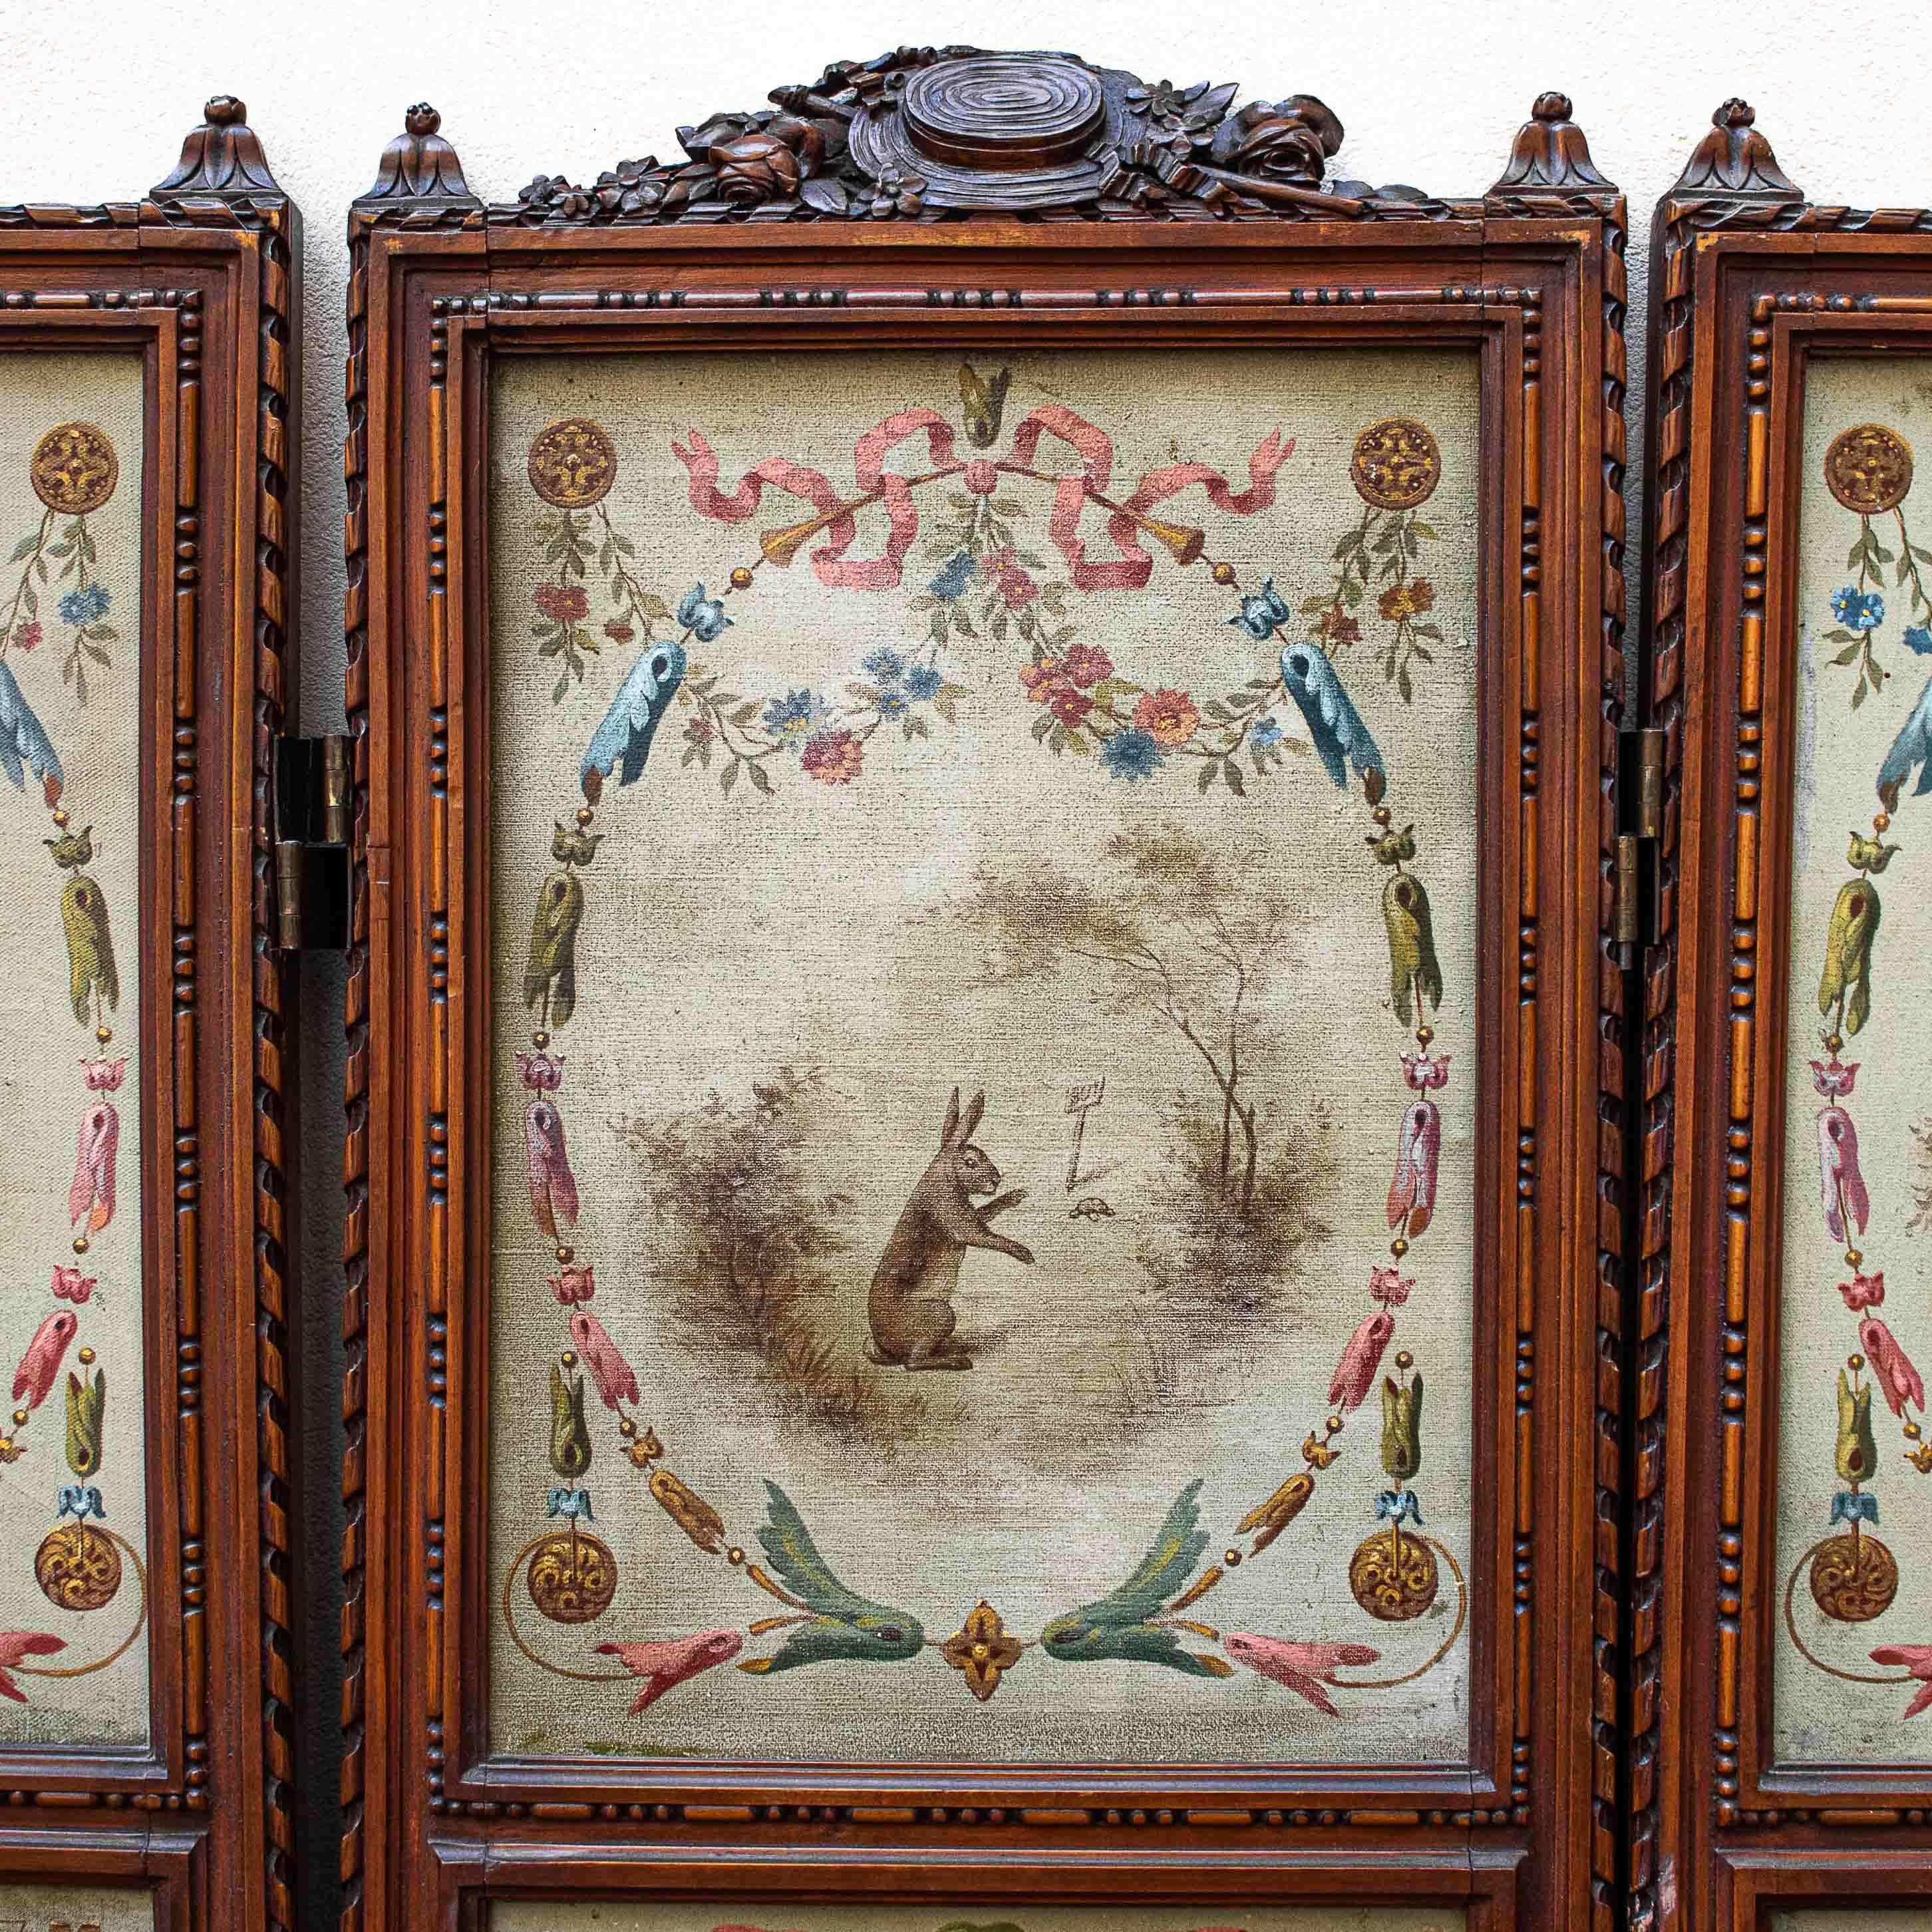 Nineteenth century
Screen with grotesques
Measures: (5) Oil on canvas, 158 x 185 cm

The screen analyzed is made up of five panels, each divided into two panels decorated with elements of the natural world on the upper level and grotesque